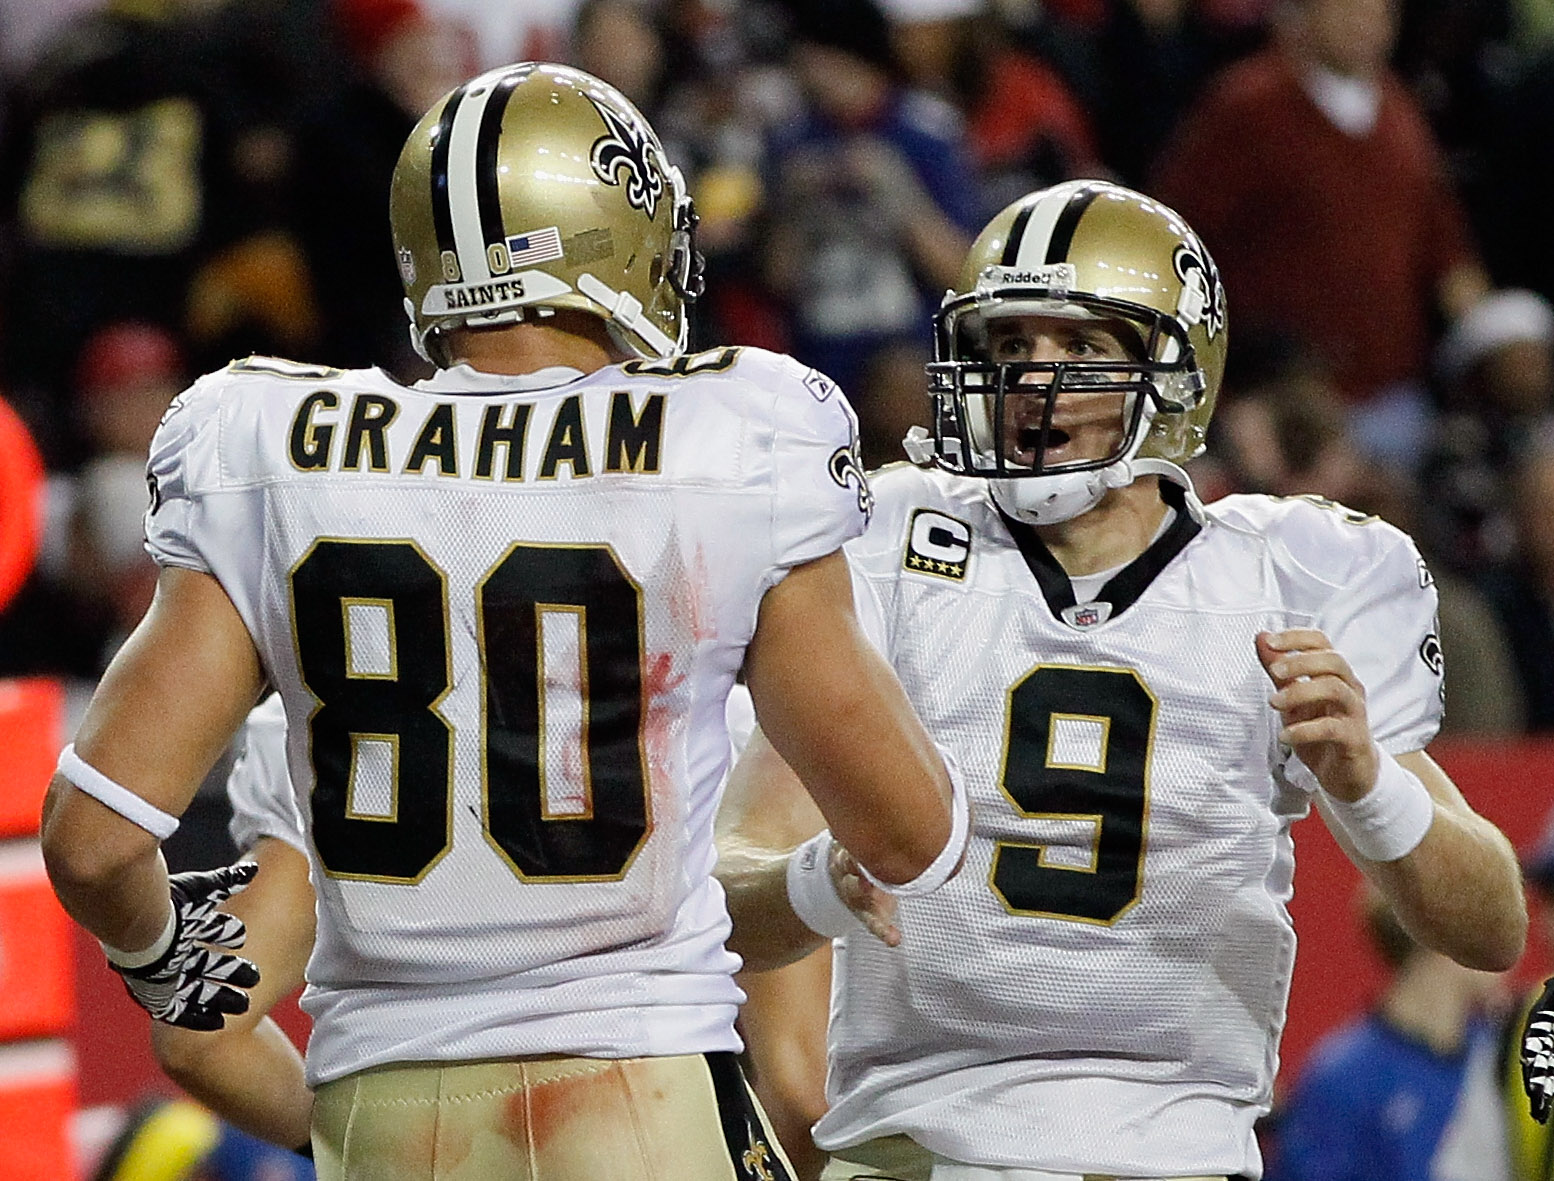 ATLANTA, GA - DECEMBER 27:  Quarterback Drew Brees #9 of the New Orleans Saints celebrates a touchdown pass to Jimmy Graham #80 in the second half during the game against the Atlanta Falcons at the Georgia Dome on December 27, 2010 in Atlanta, Georgia.  (